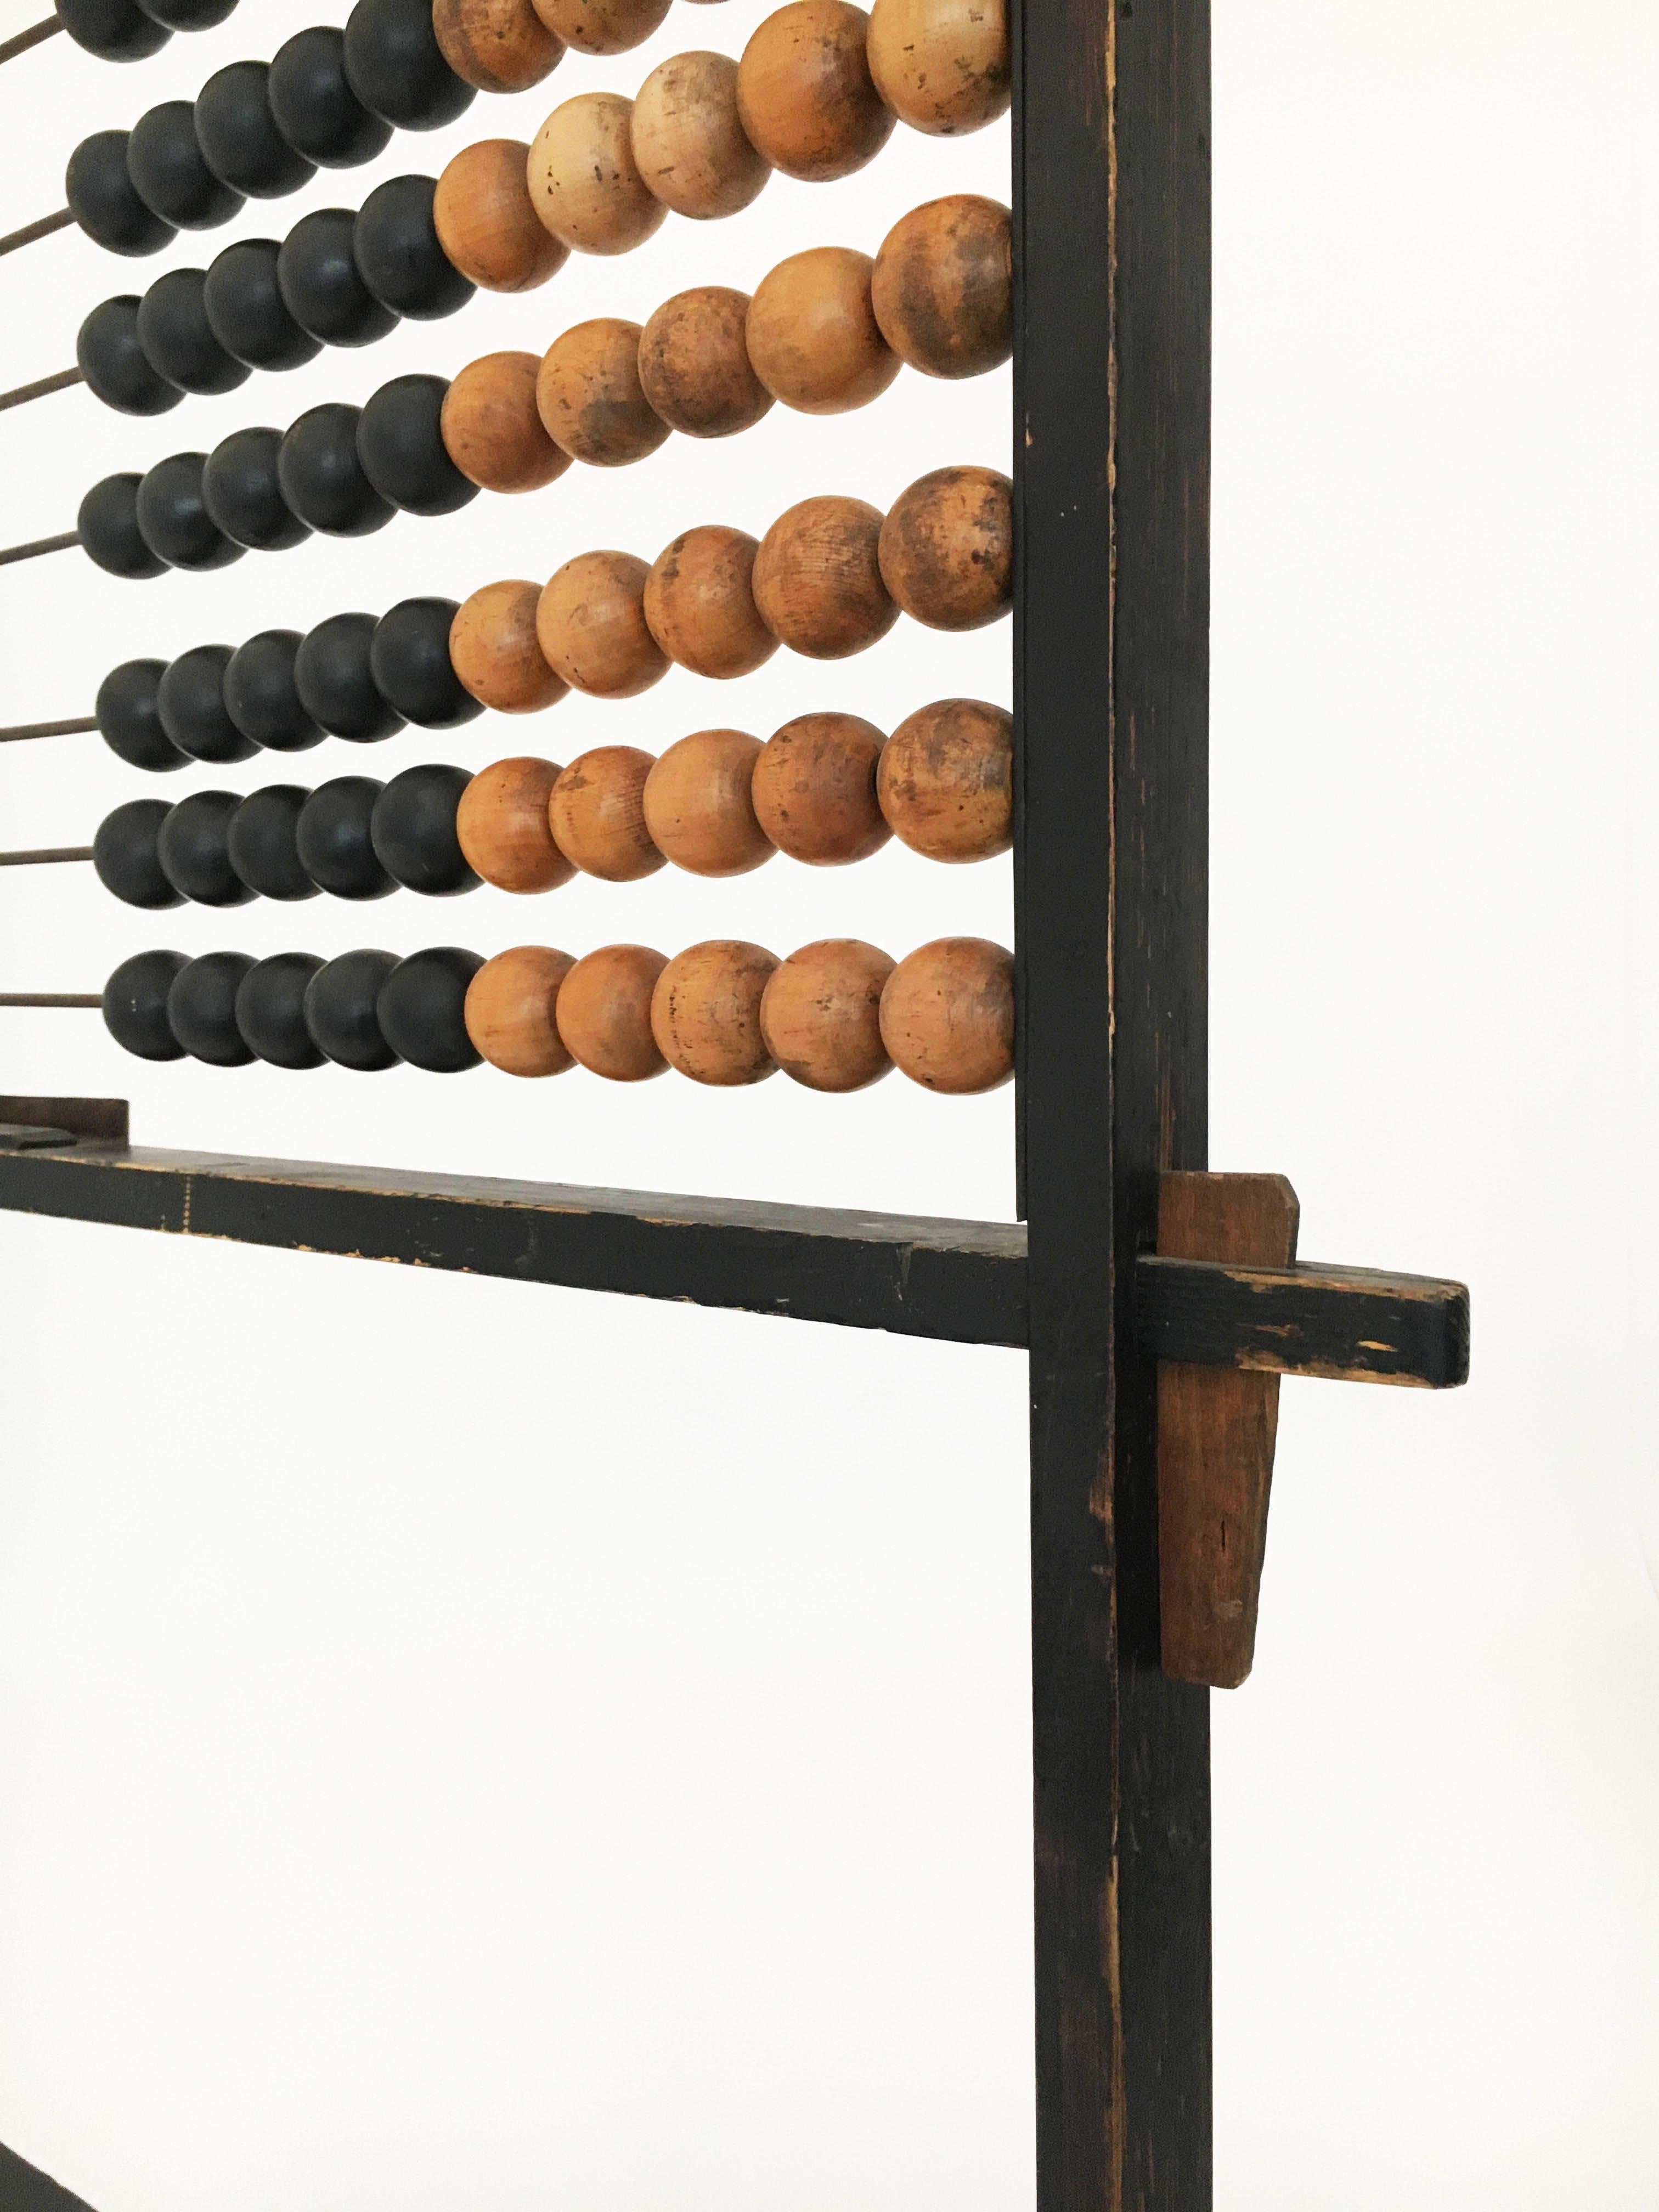 Early 20th Century Primitive Modern Abacus Sculpture Historical Obsolete Object, Austria 1920s